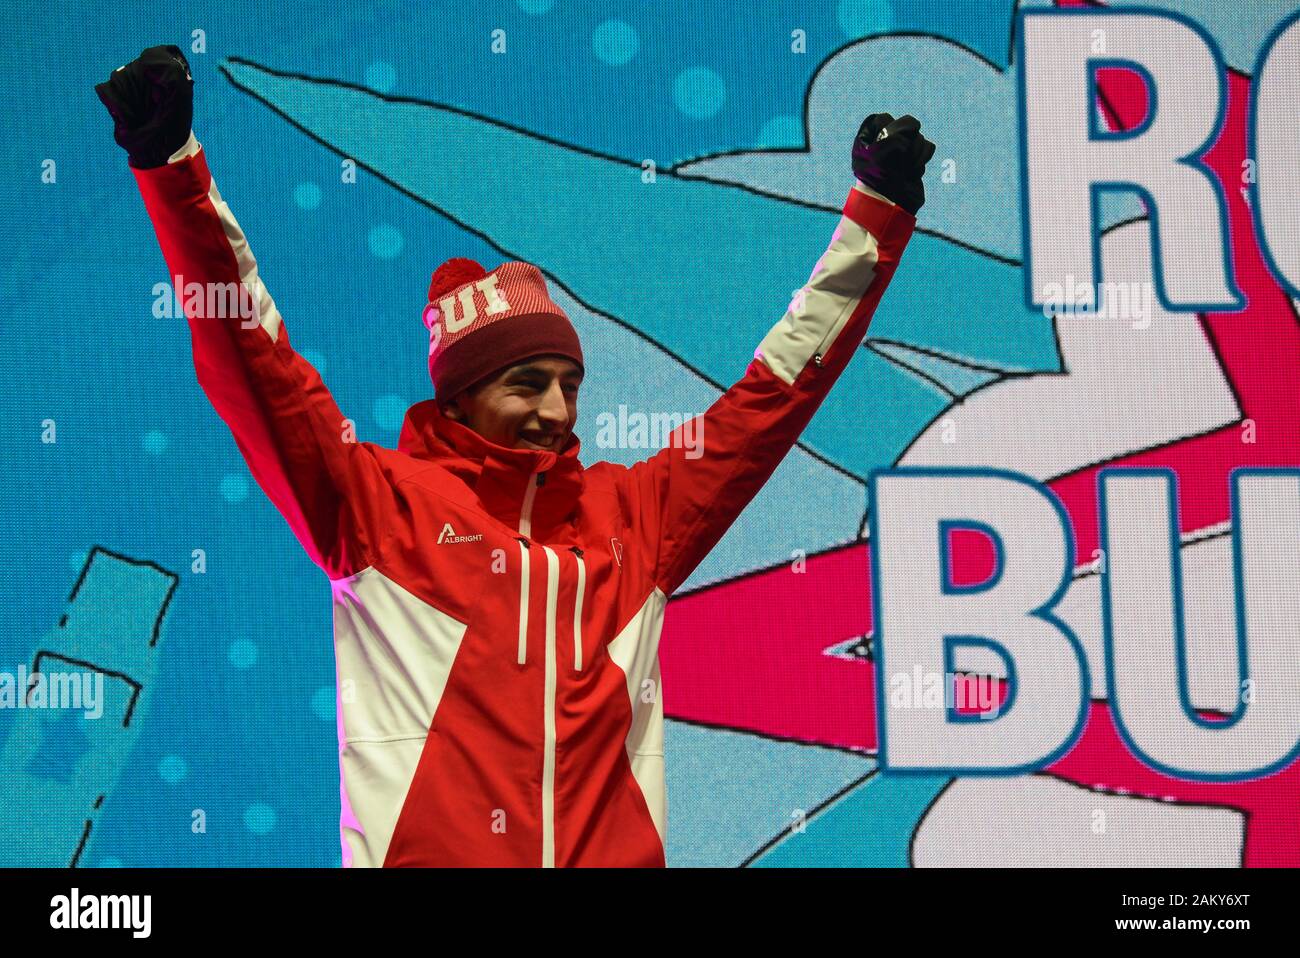 Lausanne, Switzerland. 10th Jan, 2020. Thomas Bussard of Switzerland celebrates winning the gold medal in the Men's Individual Ski Mountaineering event in the 2020 Winter Youth Olympic Games in Lausanne Switzerland. Credit: Christopher Levy/ZUMA Wire/Alamy Live News Stock Photo